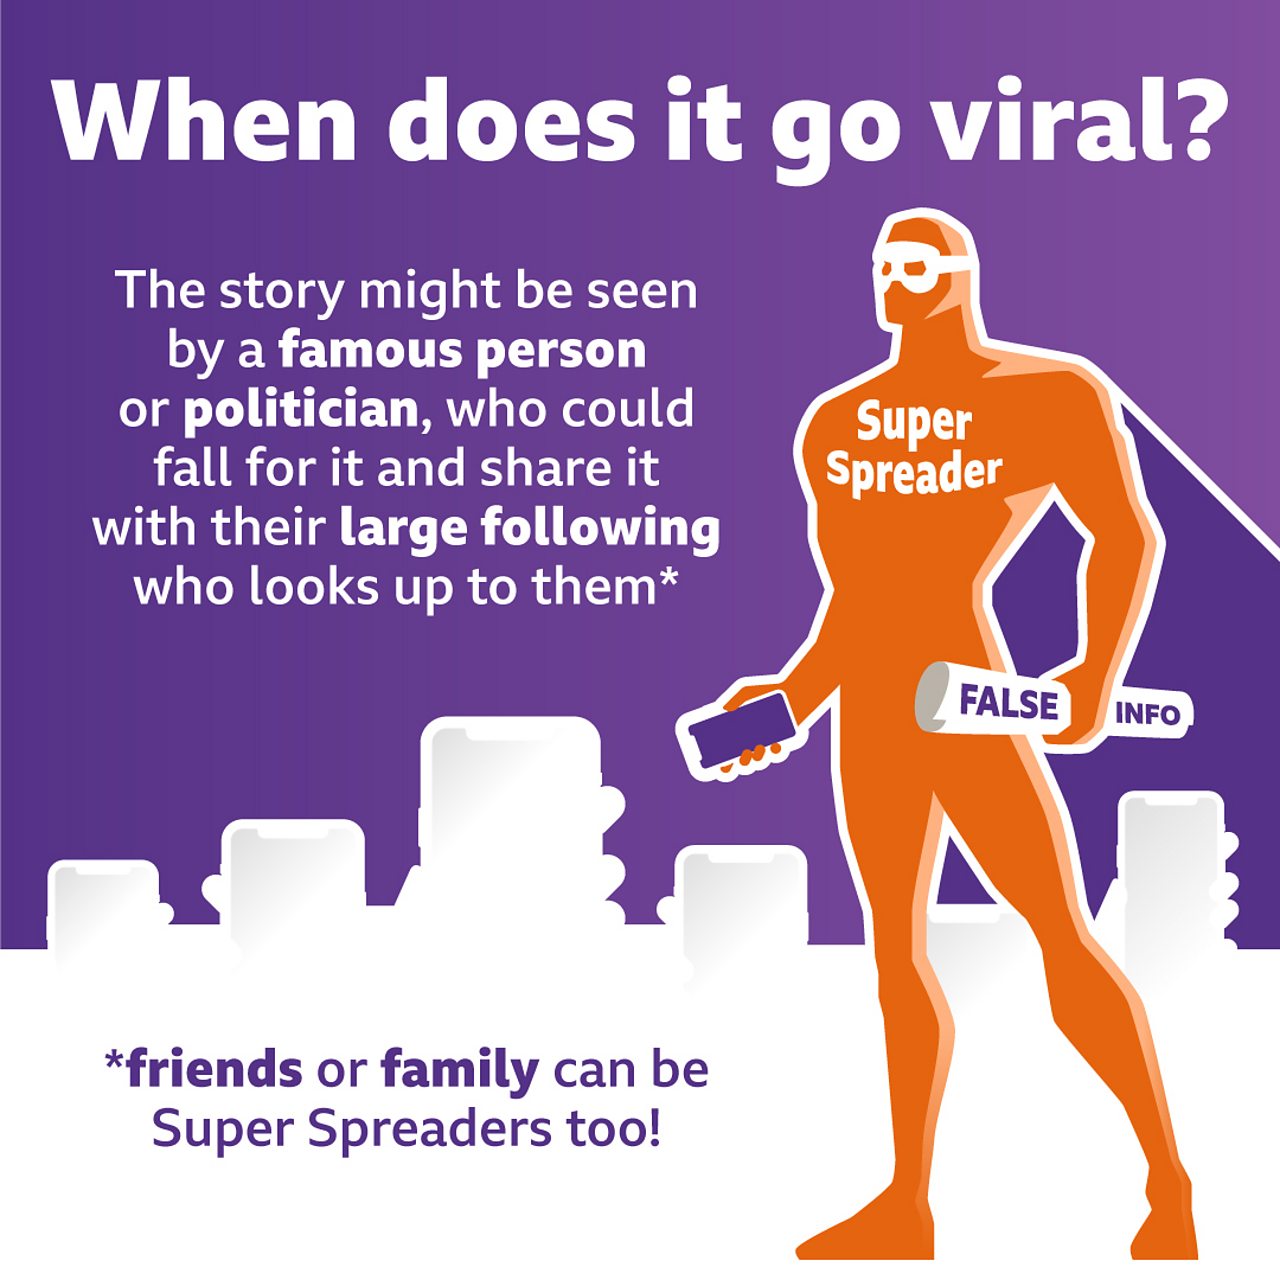 An illustration with the title “When does it go viral?”. A superhero stands next to lots of hands holding phones, with the words “Super Spreader” on their chest and carrying a rolled-up paper reading “FALSE INFO”. Next to them is the text “The story might be seen by a famous person or politician, who could fall for it and share it with their large following who looks up to them. Friends or family can be Super Spreaders too!”